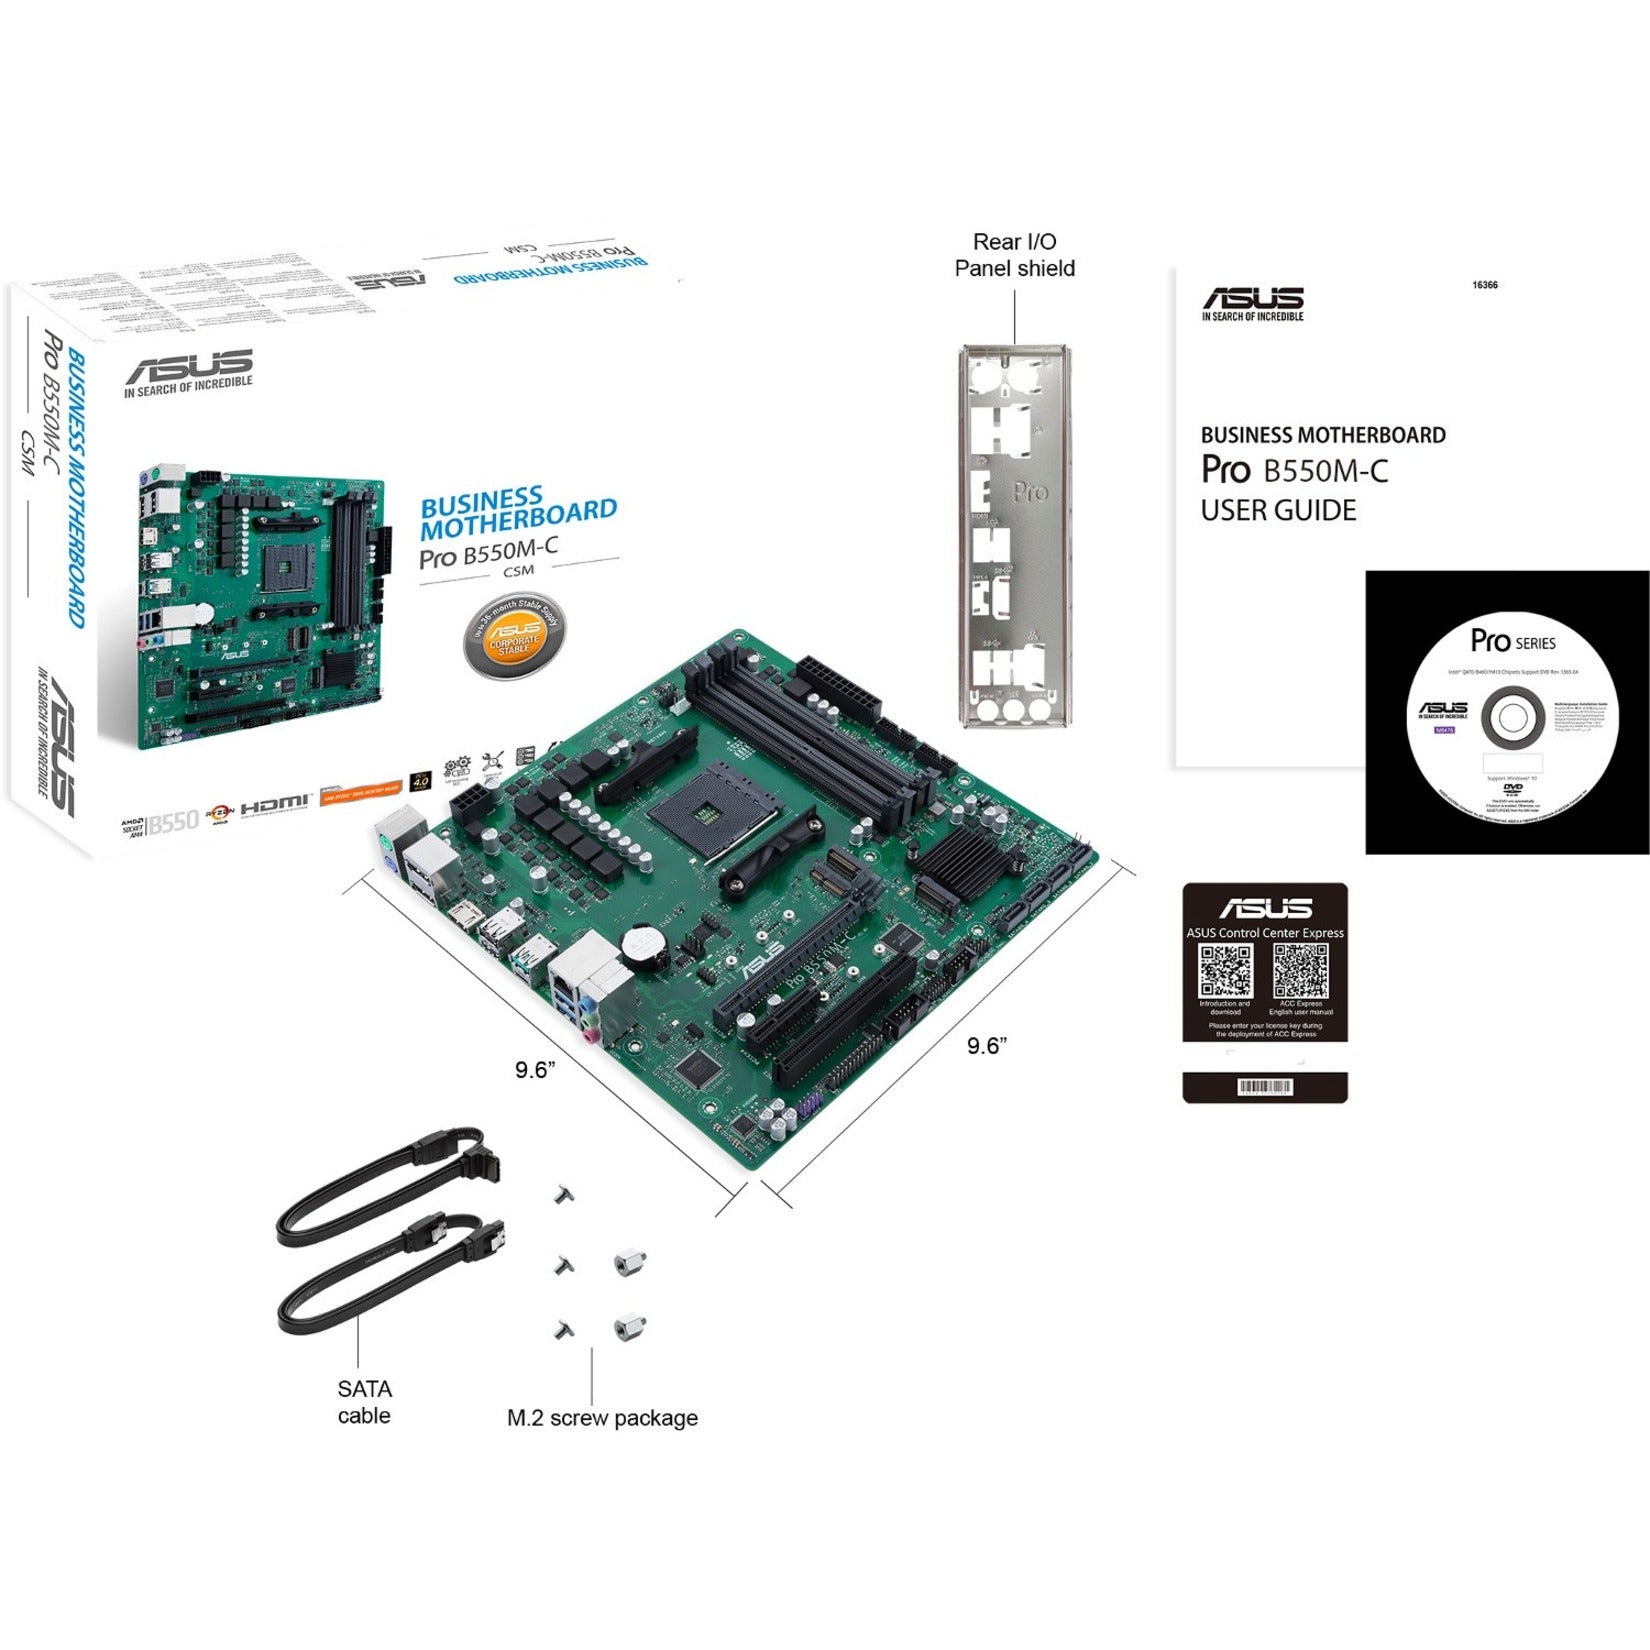 ASUS PRO B550M-C/CSM AMD AM4 (Ryzen 5000 & 3000) (90MB15Q0-M0AAYC) microATX commercial motherboard (PCIe 4.0, ECC memory, 1Gb LAN, TPM IC onboard, Dual DP, LPC debug header, Self-Recover BIOS, Event Log, ASUS Control Center Express). Powered by AMD Ryzen